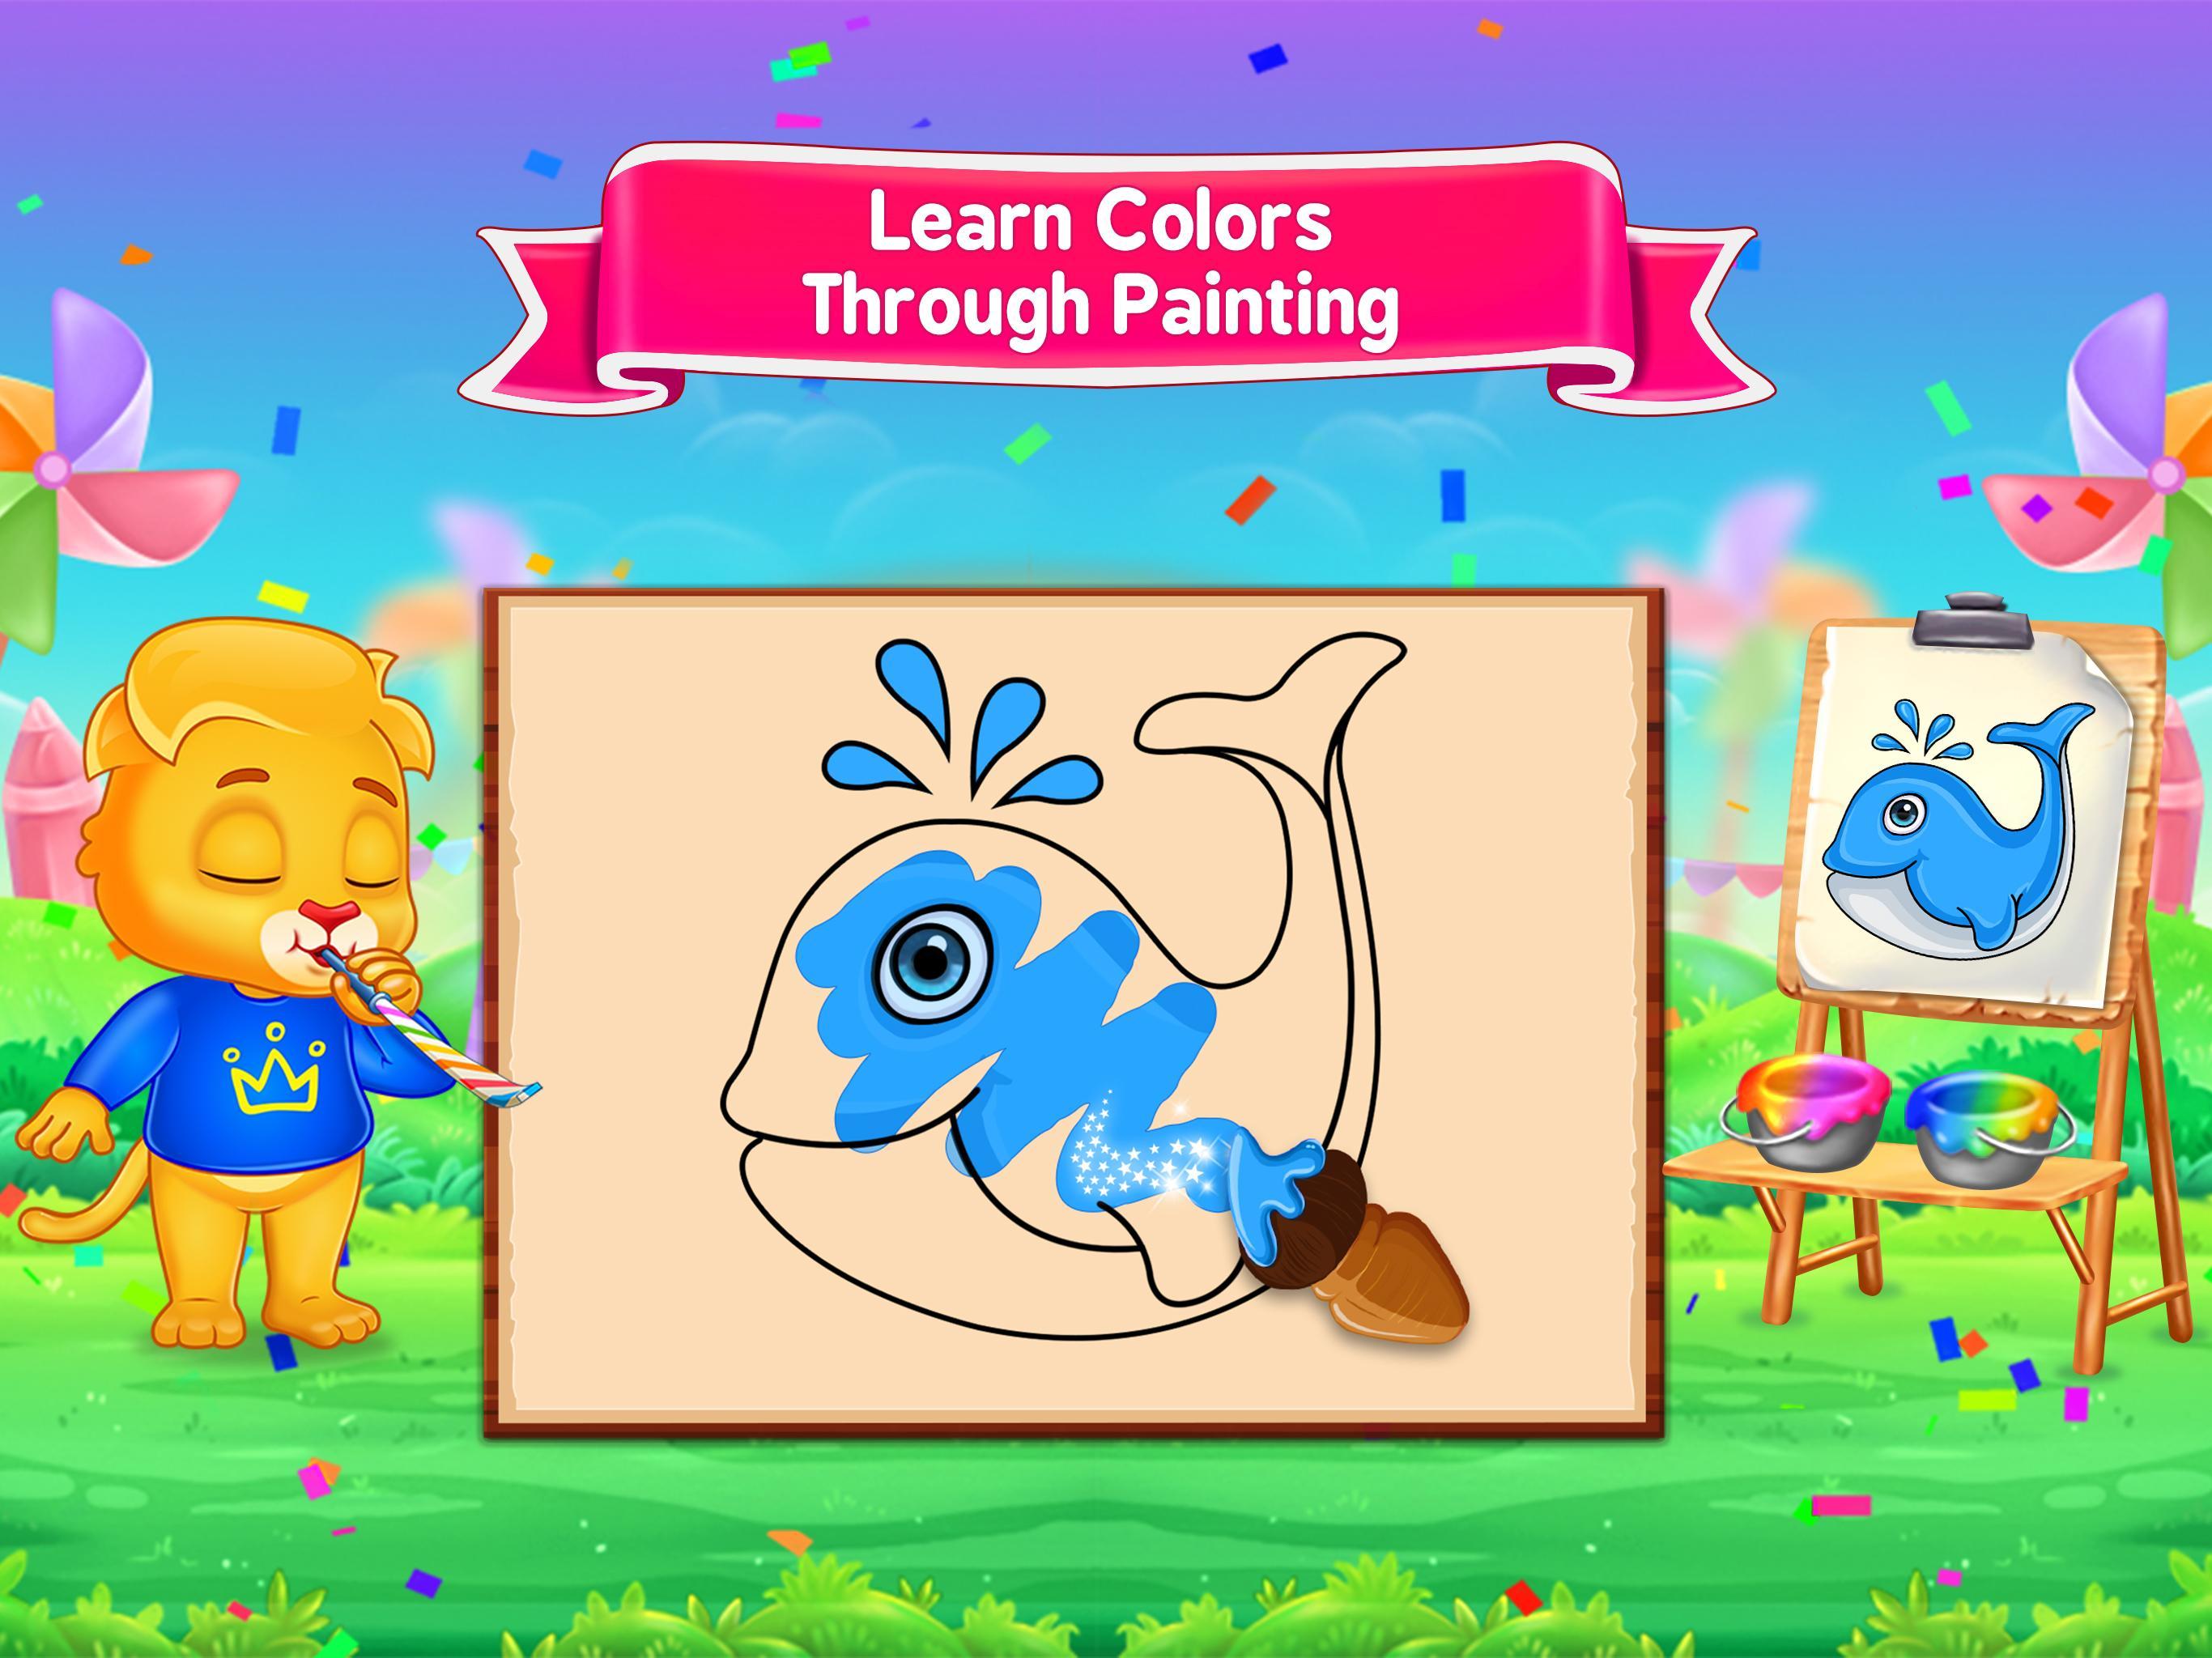 Colors & Shapes - Kids Learn Color and Shape 1.2.5 Screenshot 19